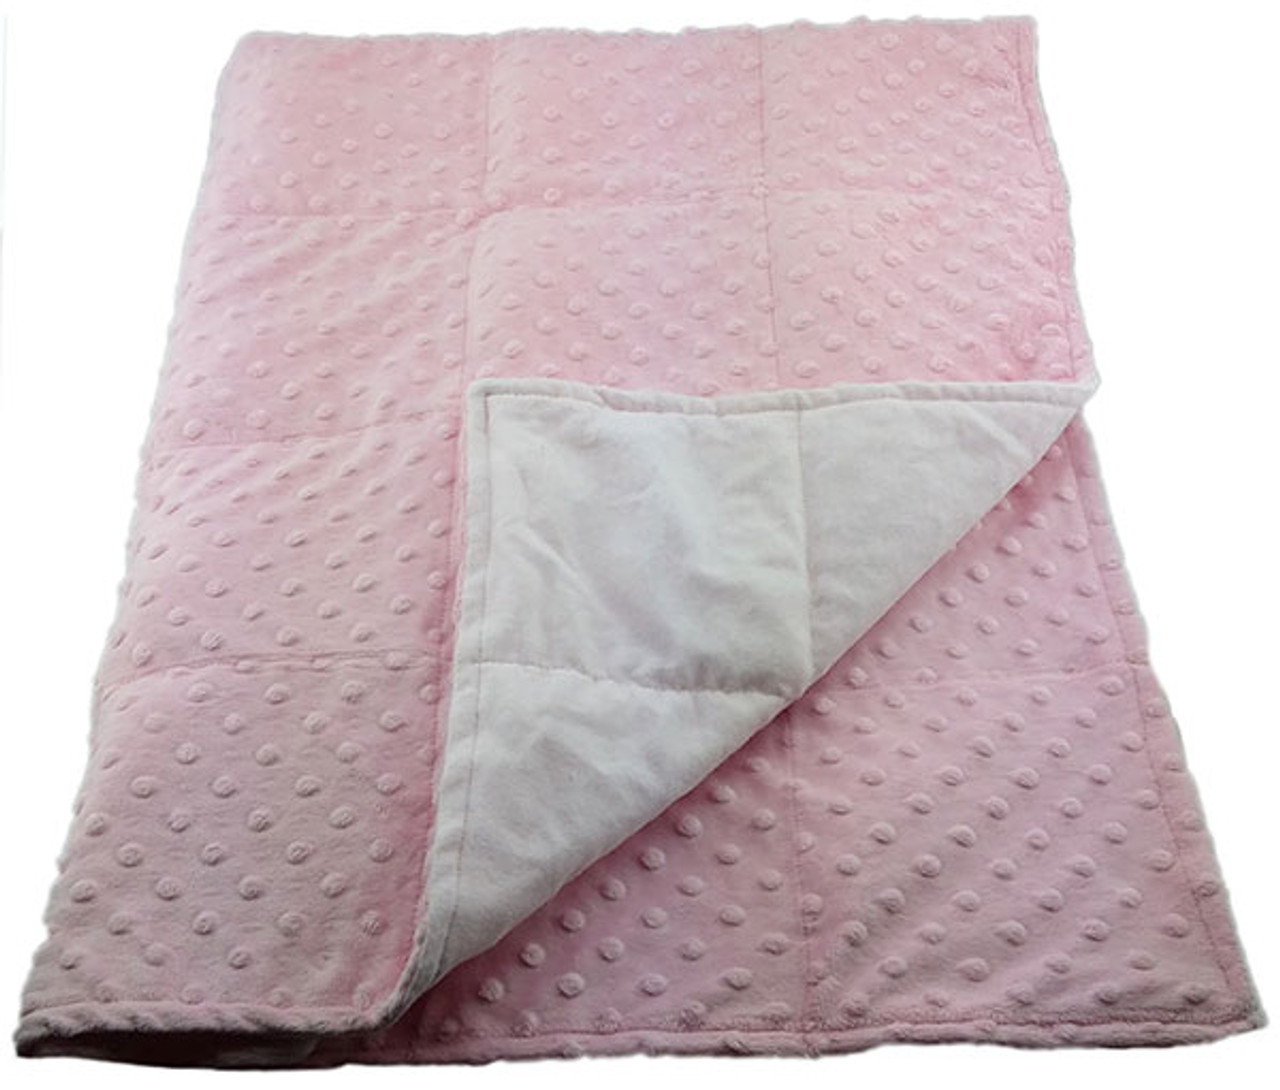 10 LB Weighted Blanket ��� Pink - Washable - OUTLET SALE